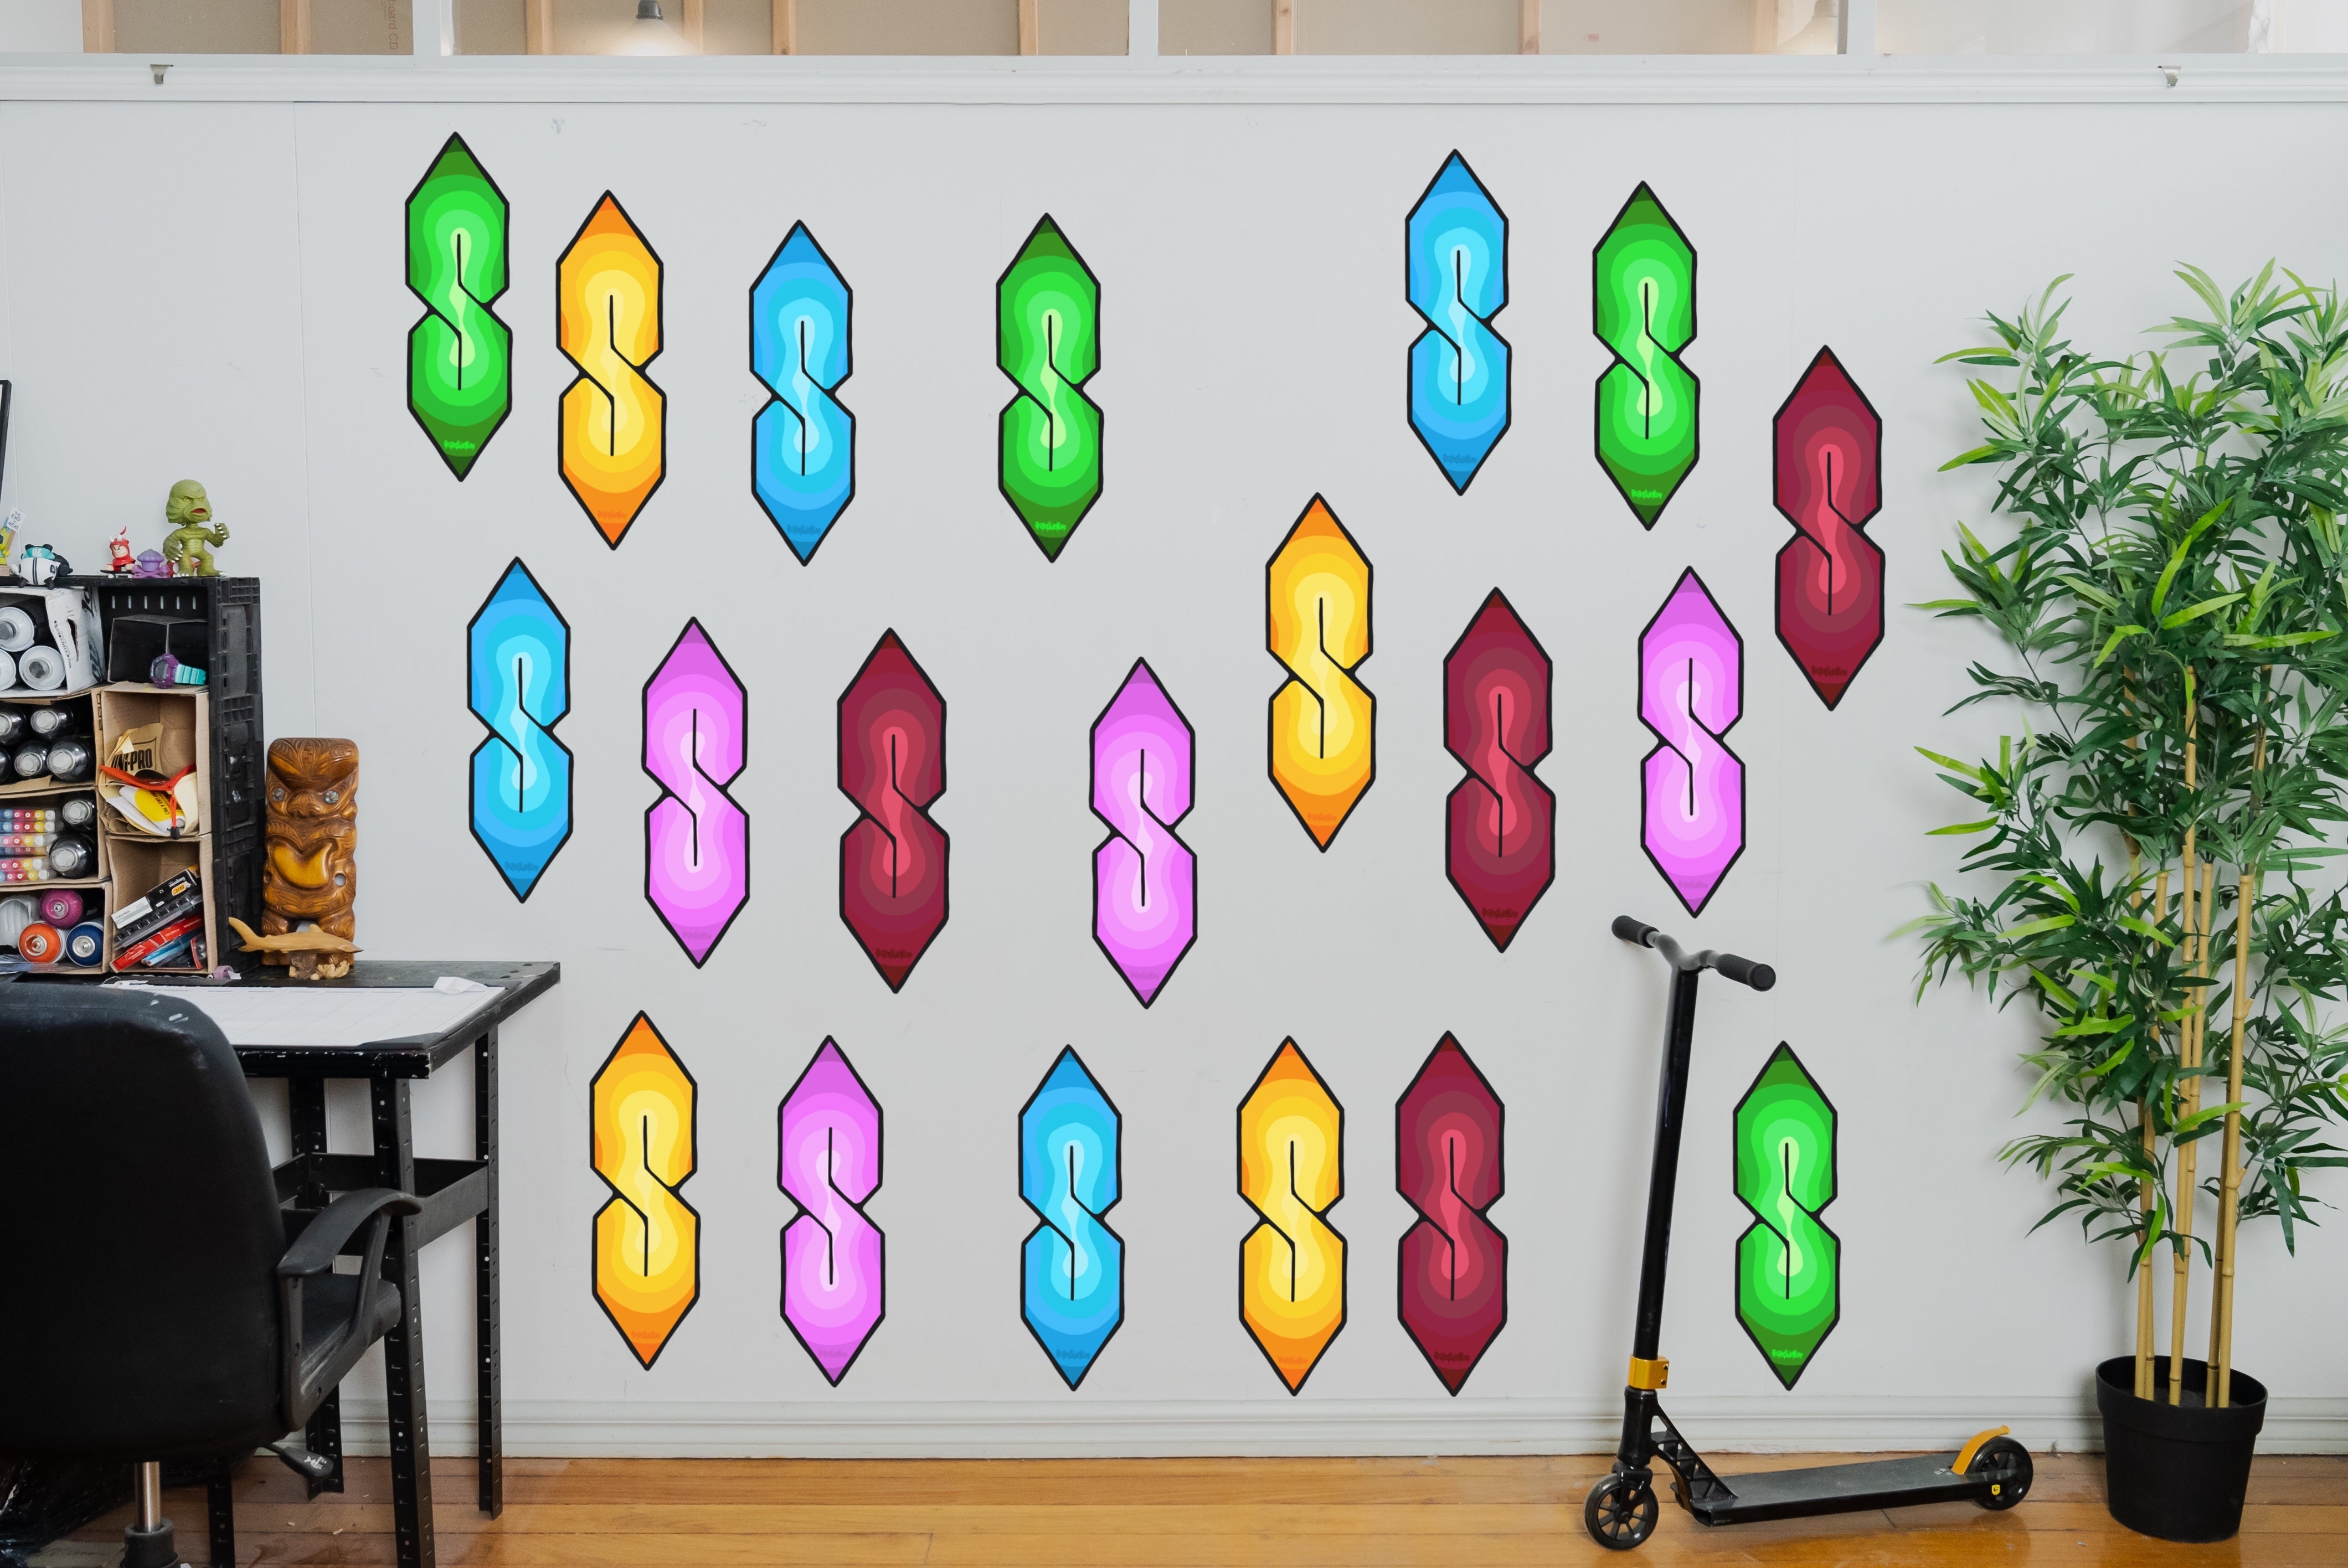 Wall Art Decal - That "S" Thingy